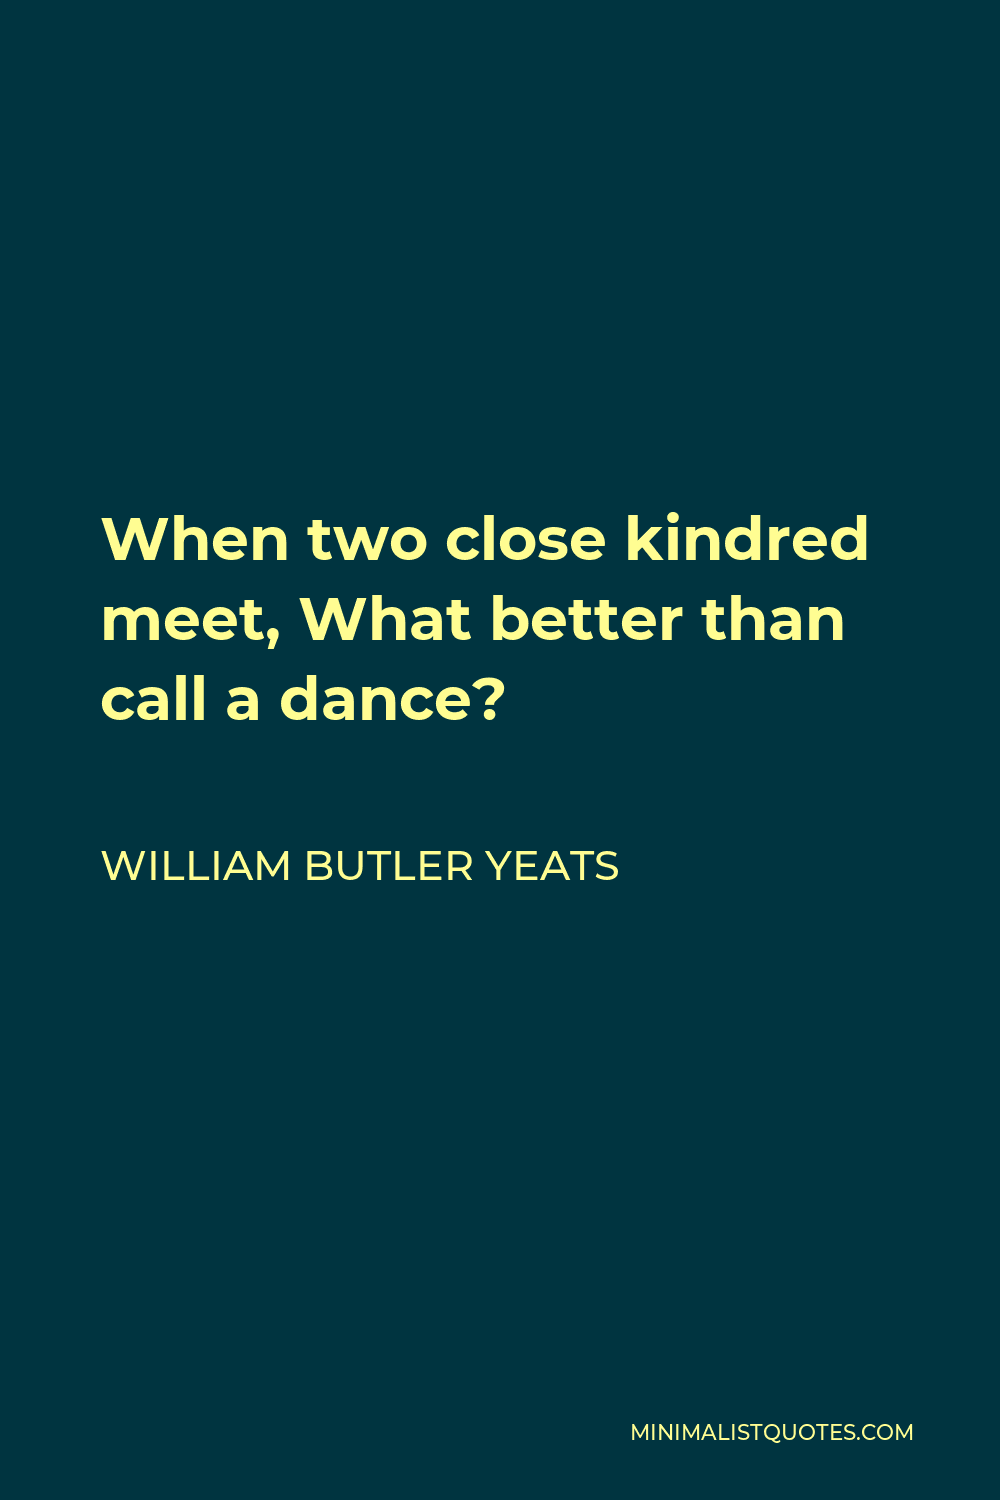 William Butler Yeats Quote - When two close kindred meet, What better than call a dance?